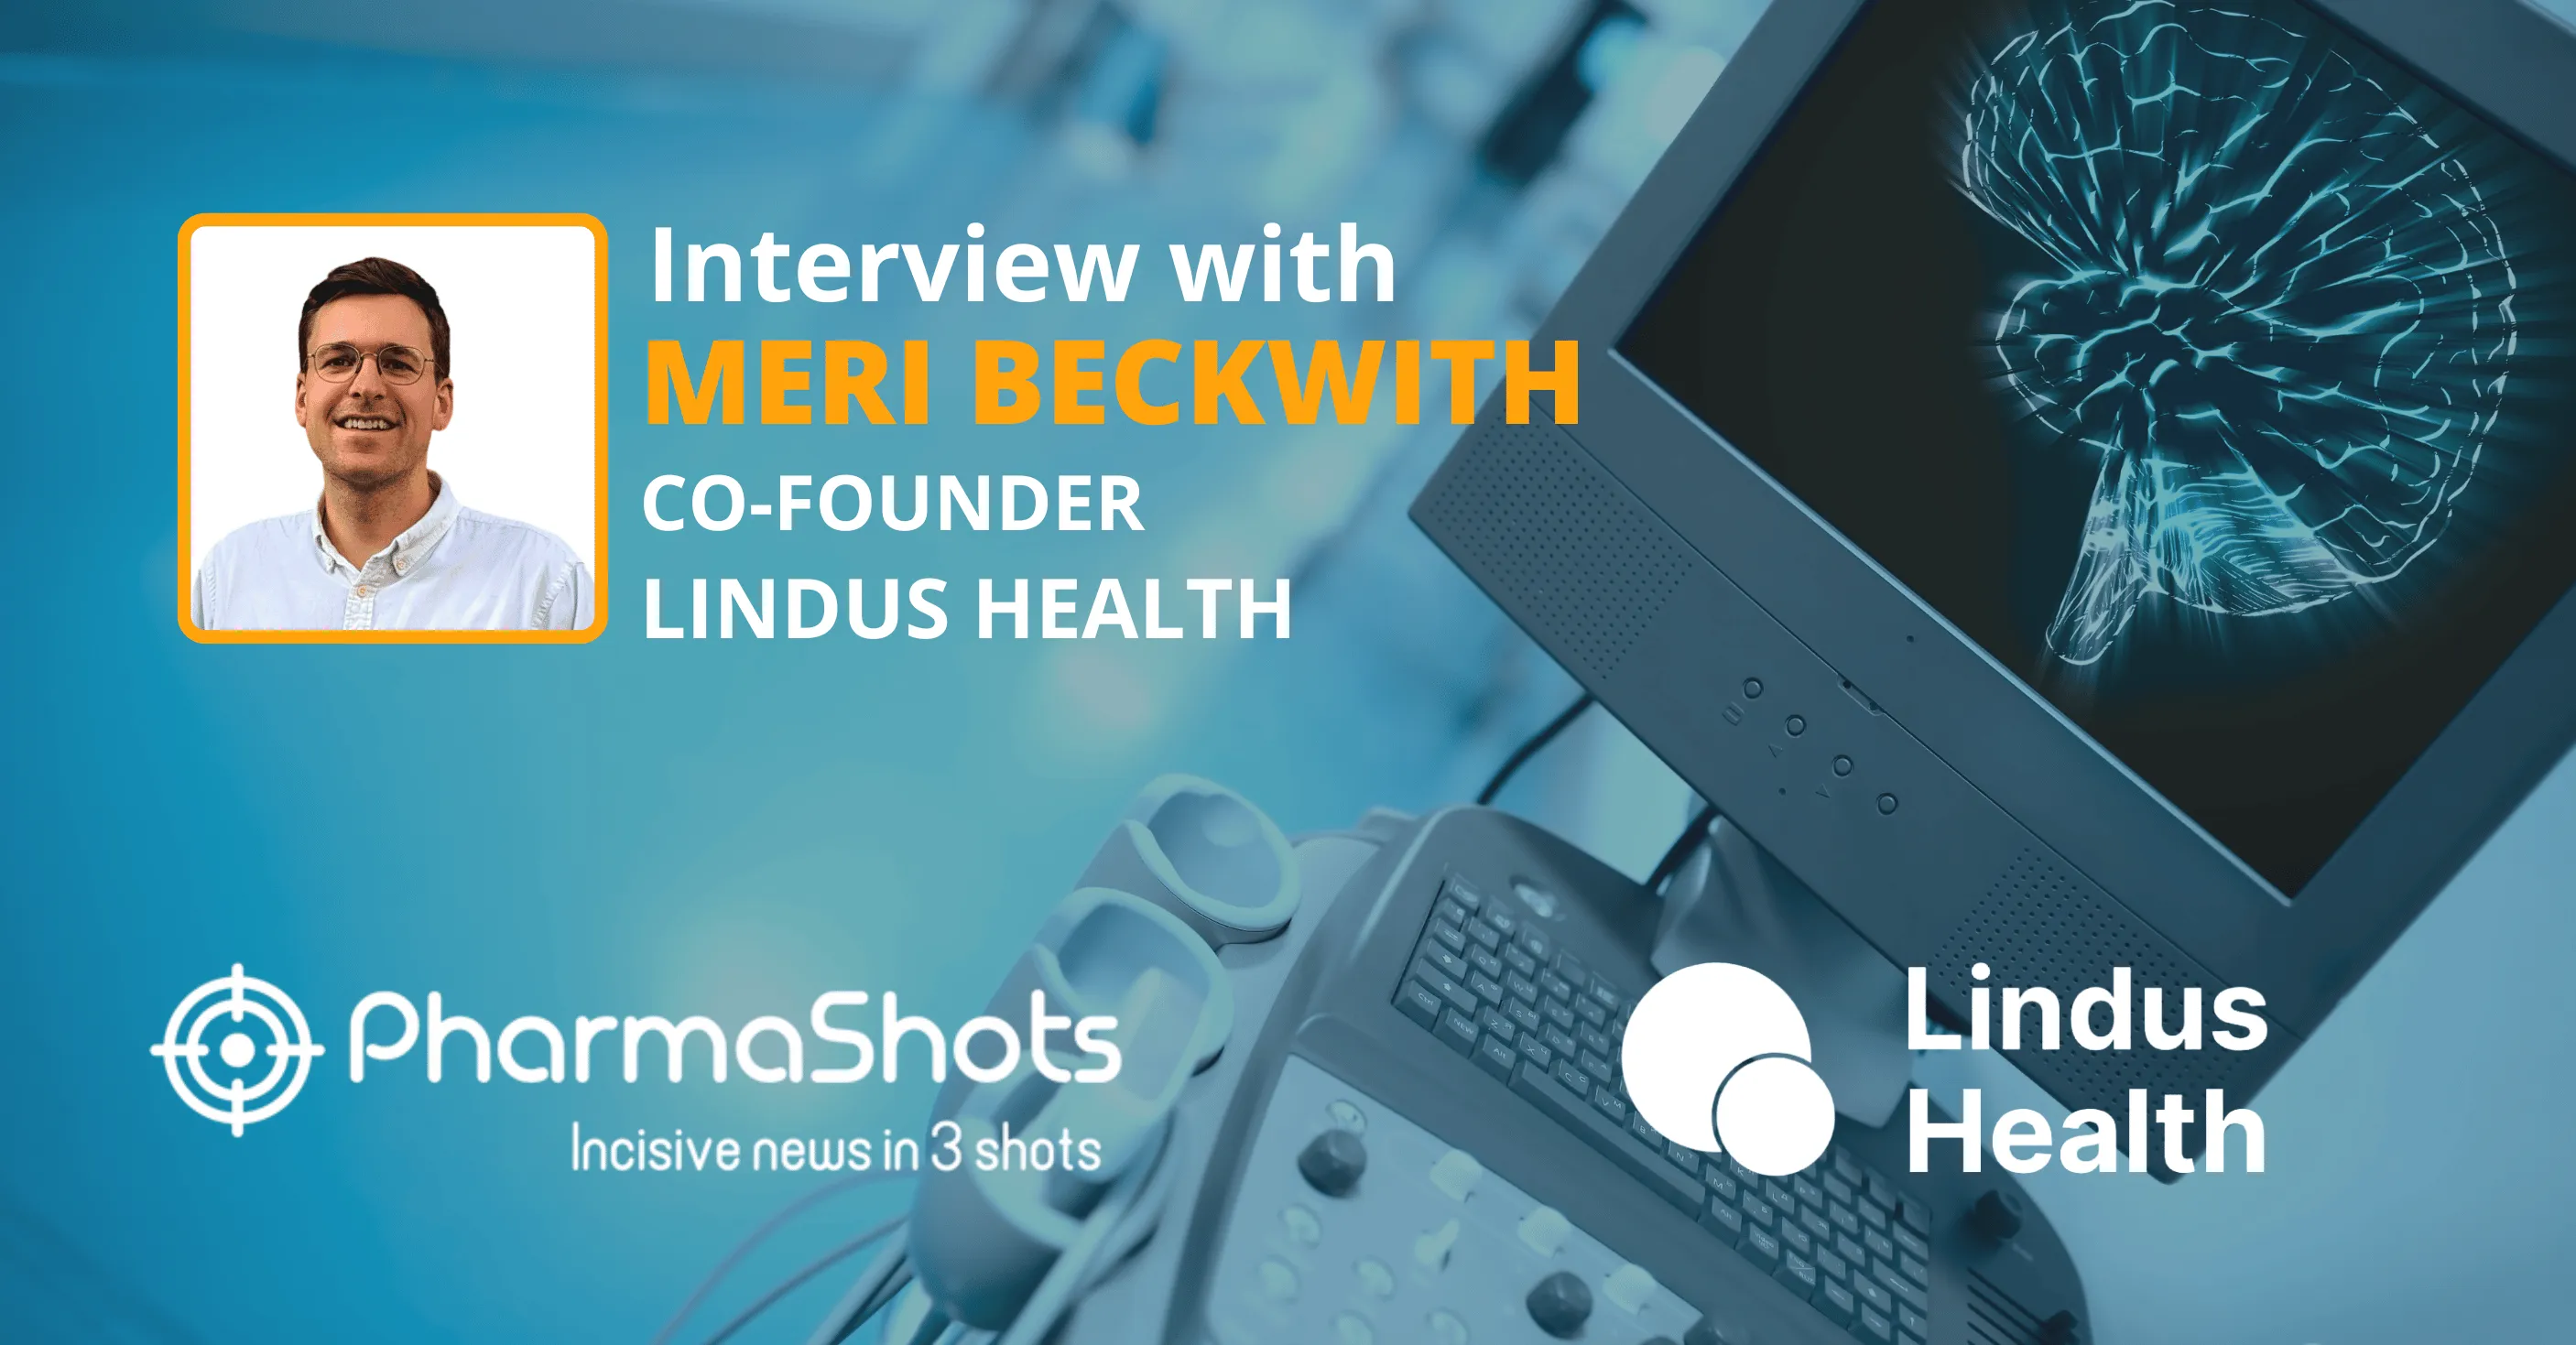 Infusing AI in Clinical Trials: Meri Beckwith from Lindus Health in Conversation with PharmaShots